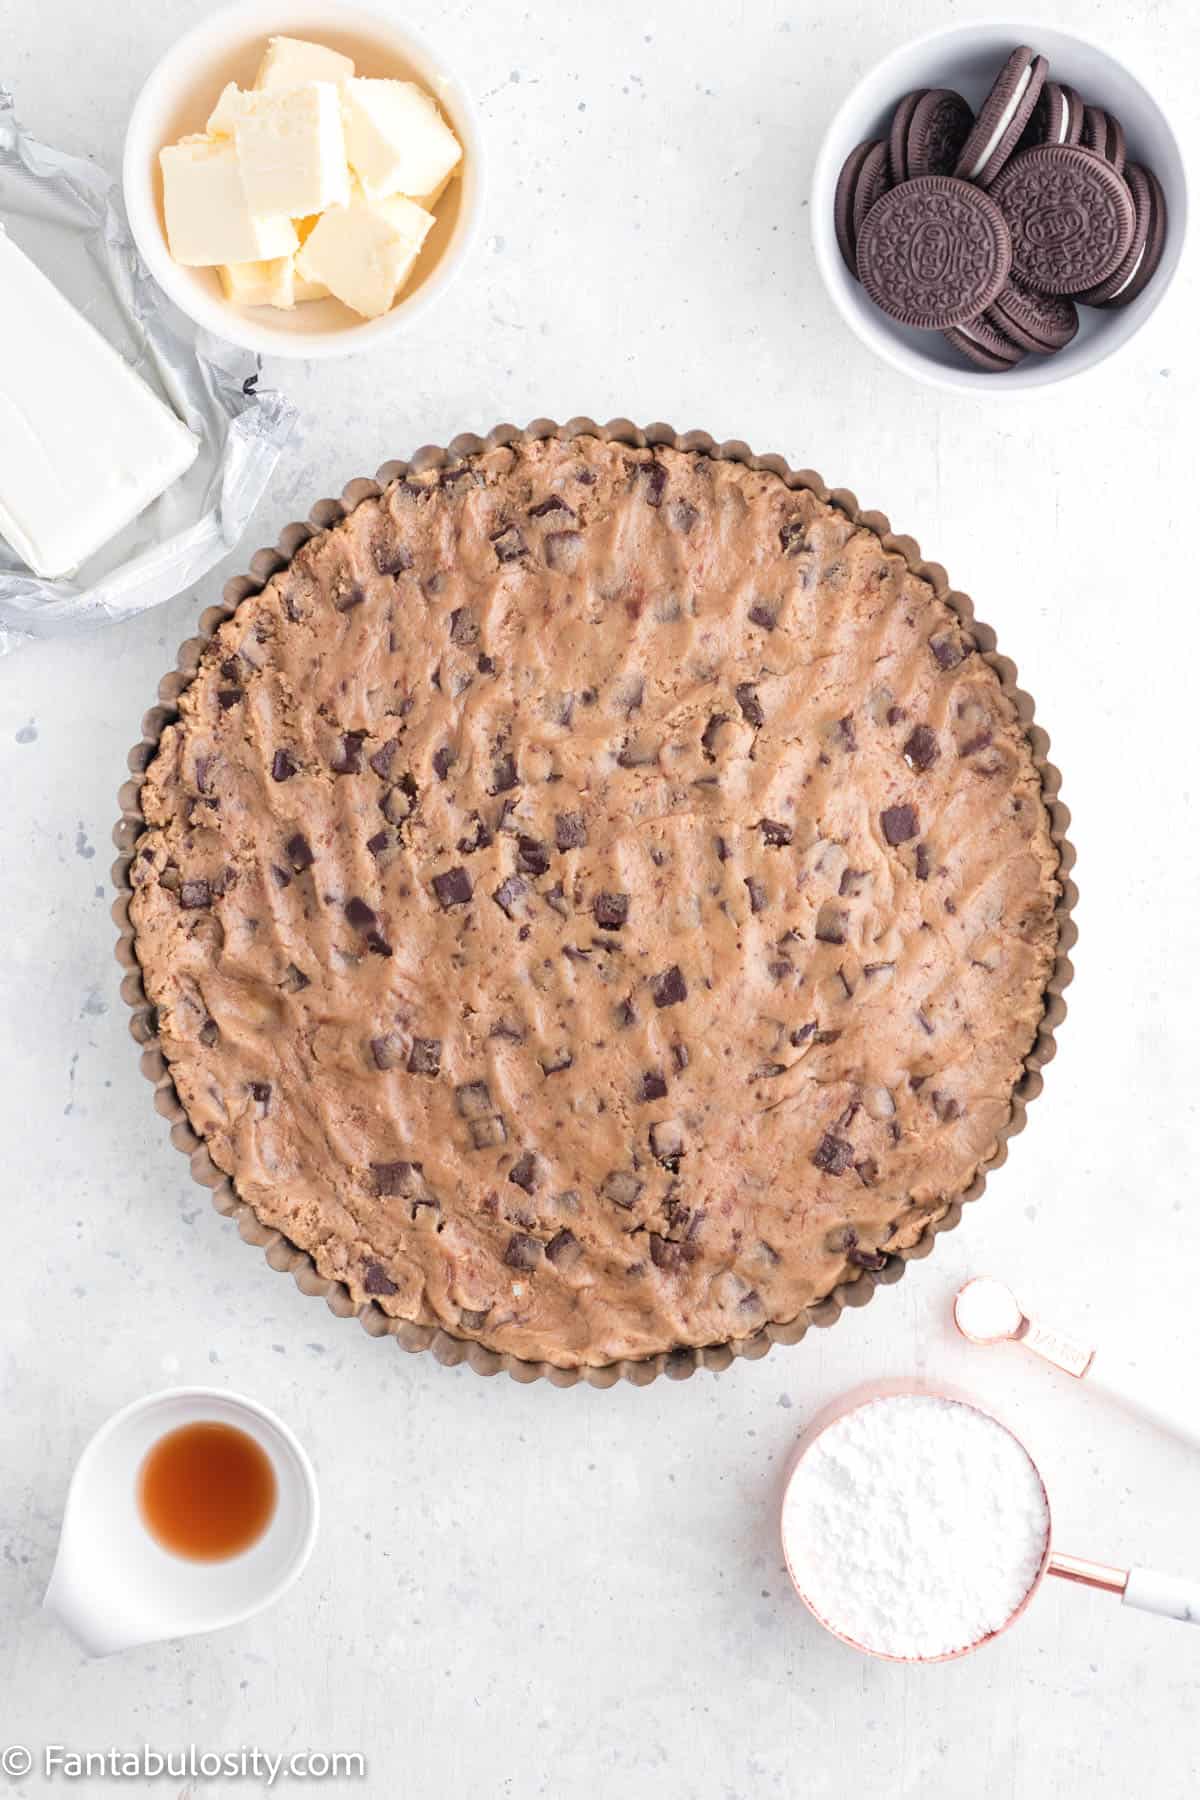 Chocolate chip cookie dough has been pressed into a 12 inch round tart pan and several other recipe ingredients are staged around it